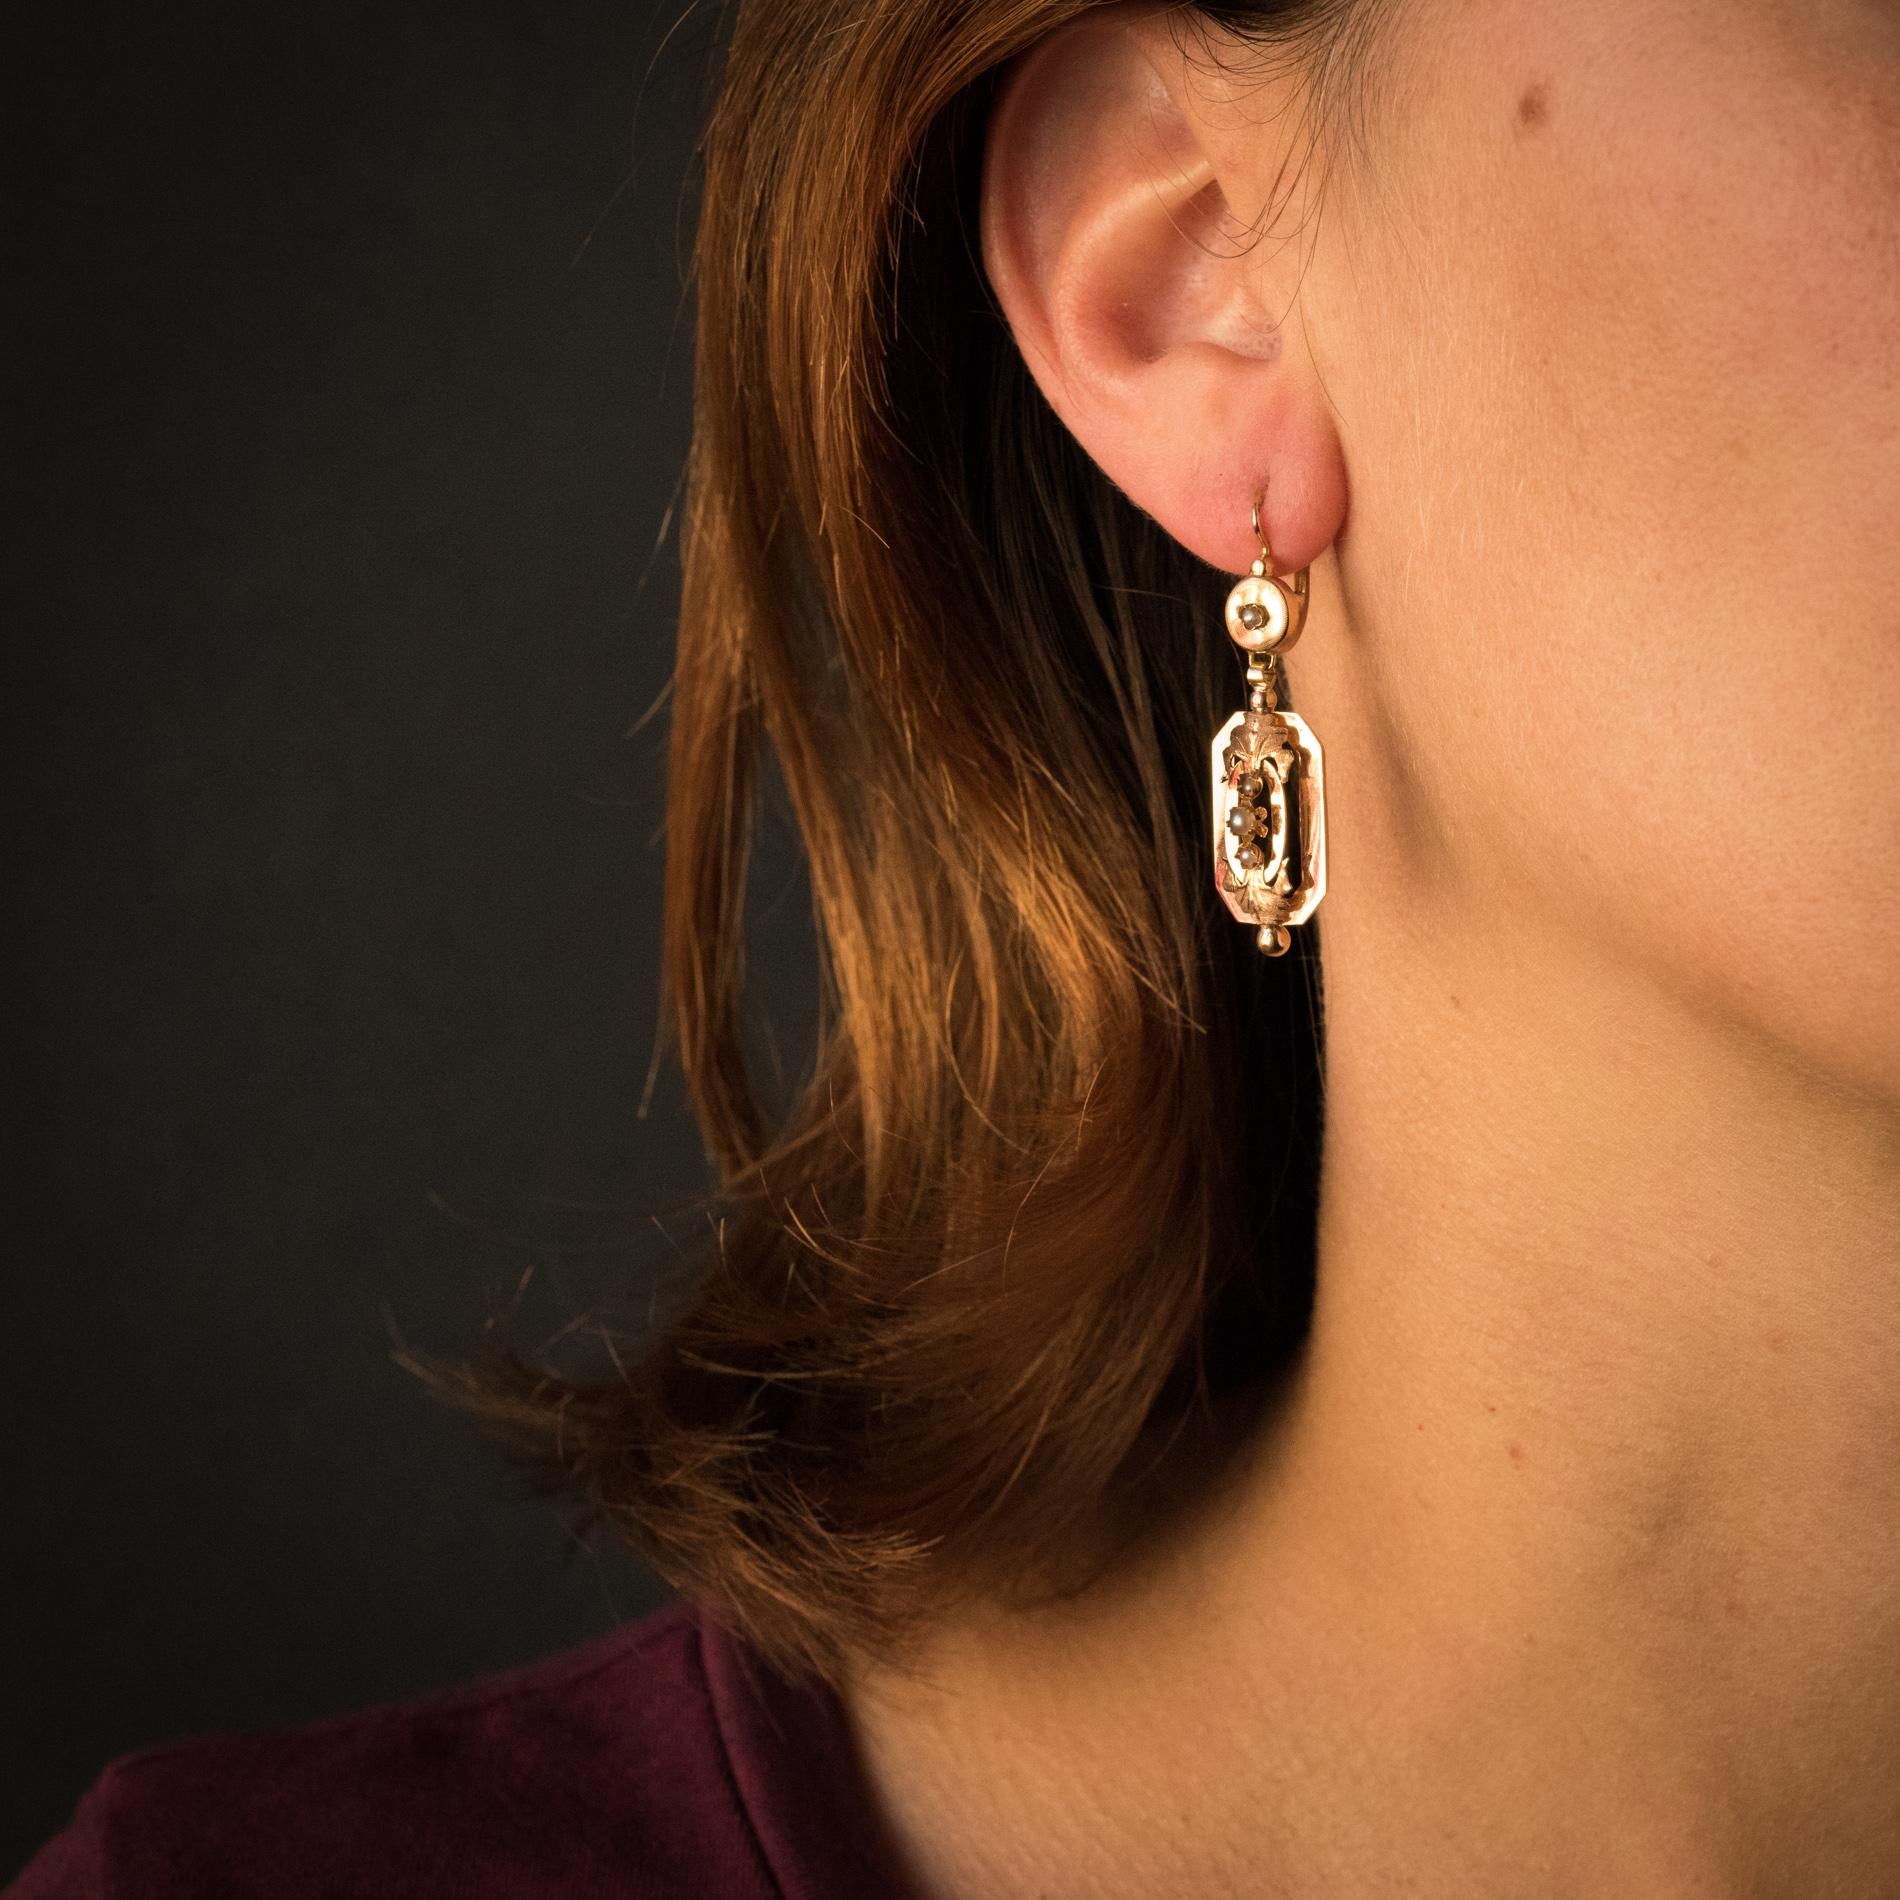 Earrings in 18 karats rose gold, horse's head hallmark.
A disc, set with a natural pearl, composes the sleeper part of these antique earrings. It holds a rectangular motif in pendants with an oval motif adorned with chiseled leaves and adorned with